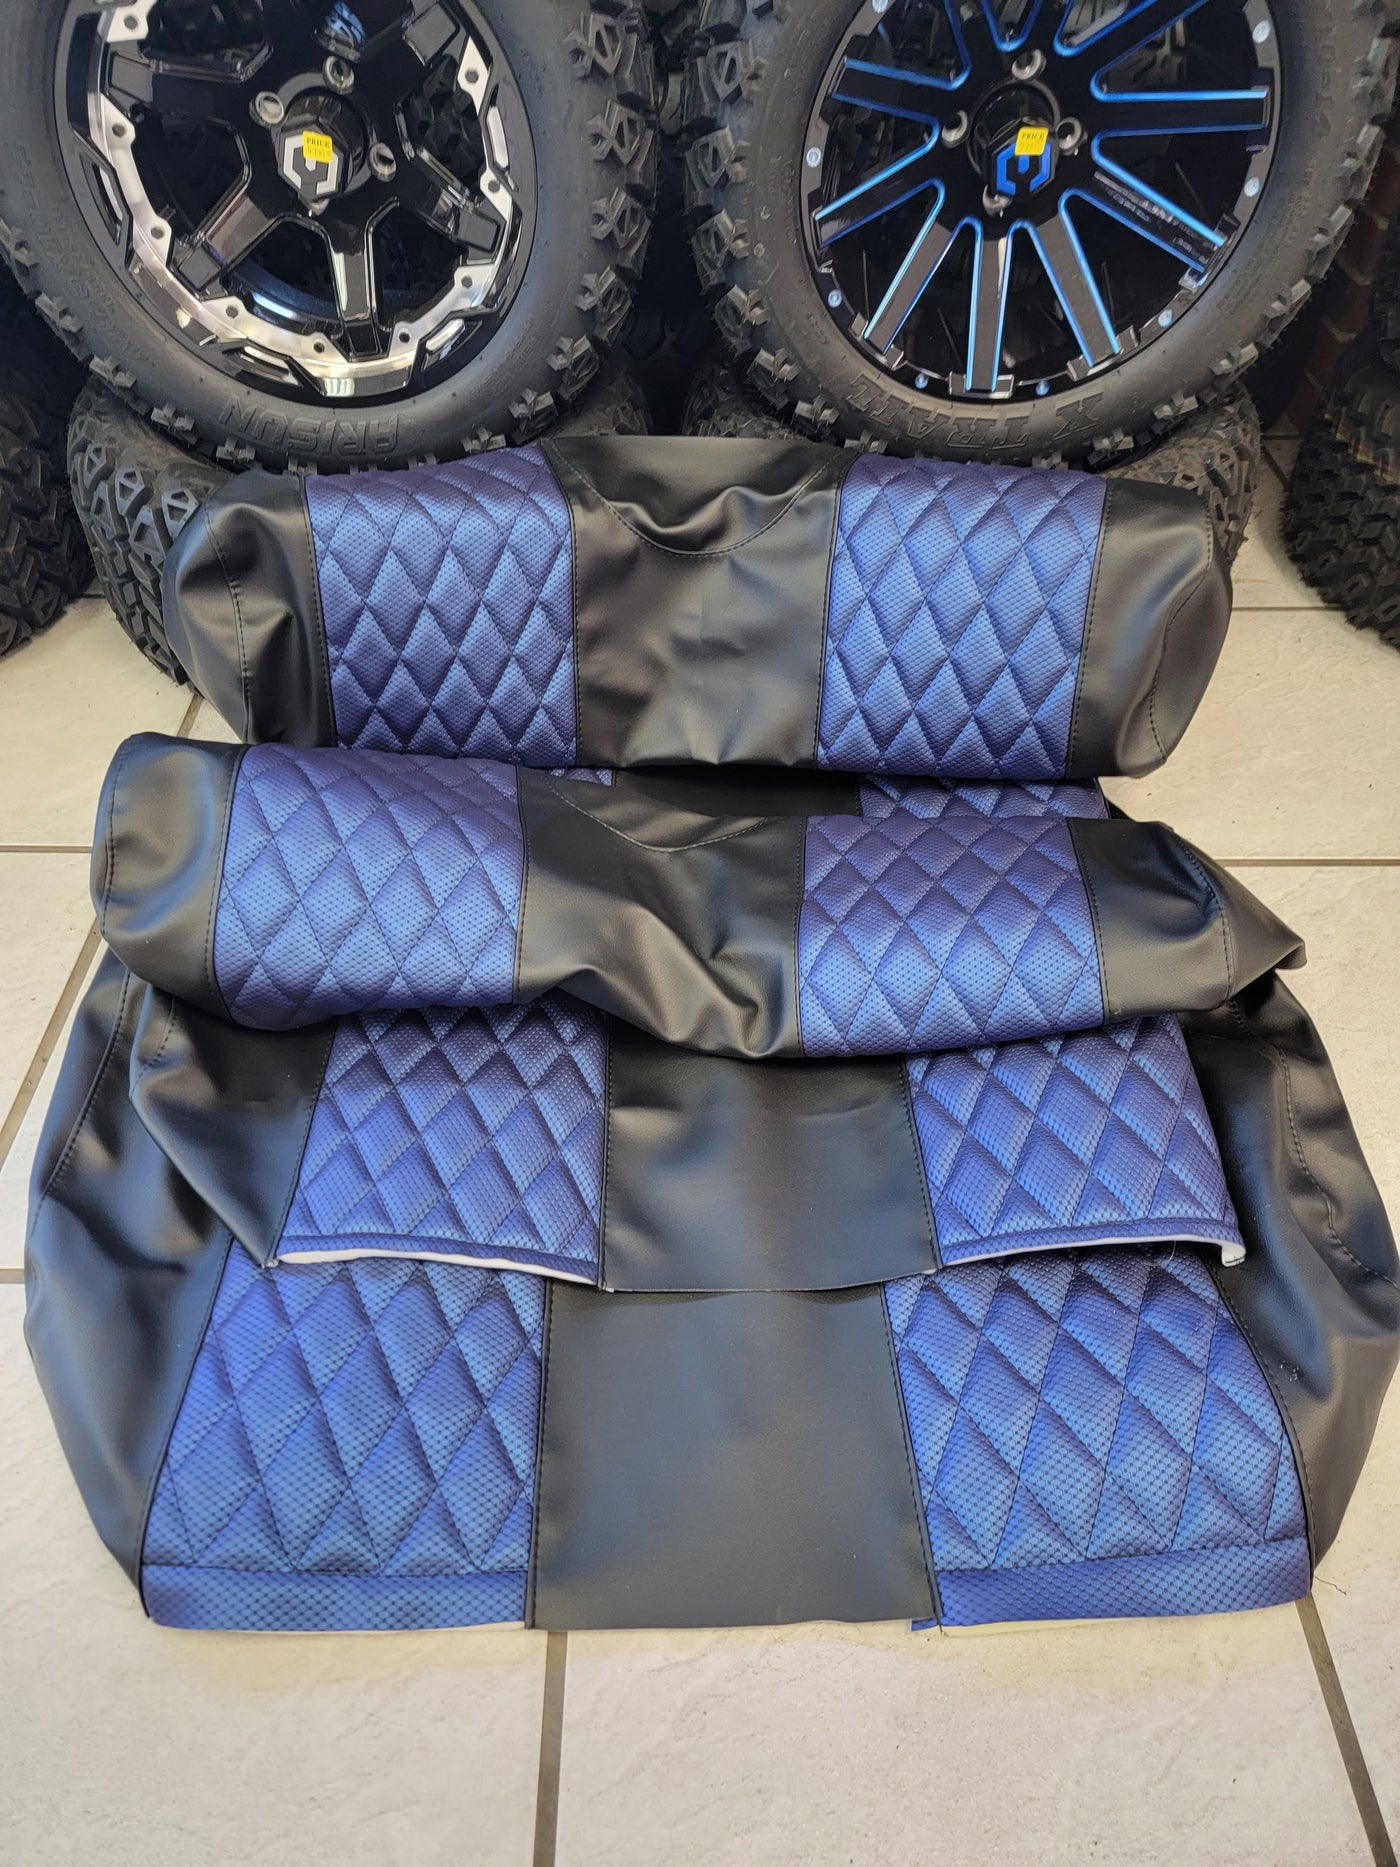 Custom Diamond Stich Black & Blue Seat Covers Ez-Go (Ezgo) Txt/Rxv 1996-Current) or Club Car DS (2000-2013) Includes Both Front Rear Seat Covers